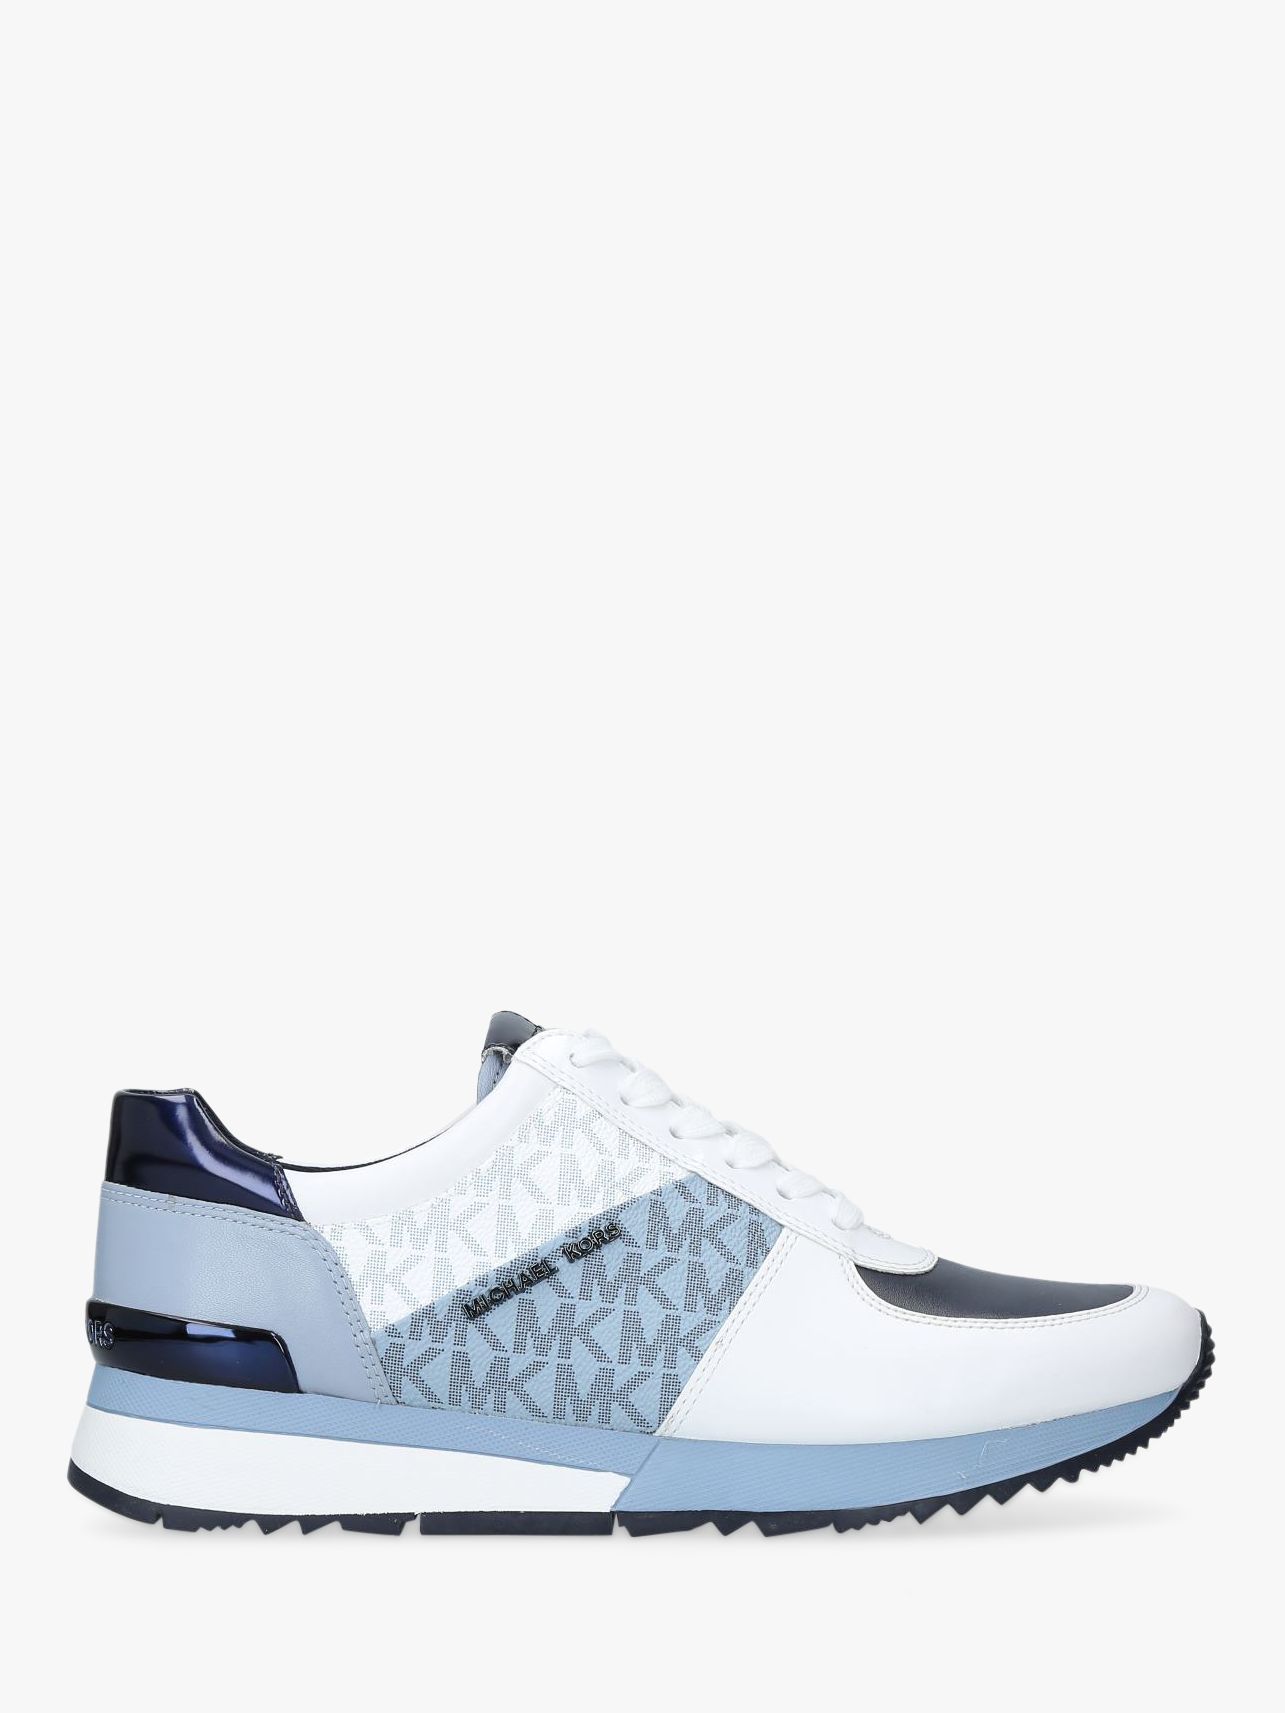 blue and white michael kors shoes